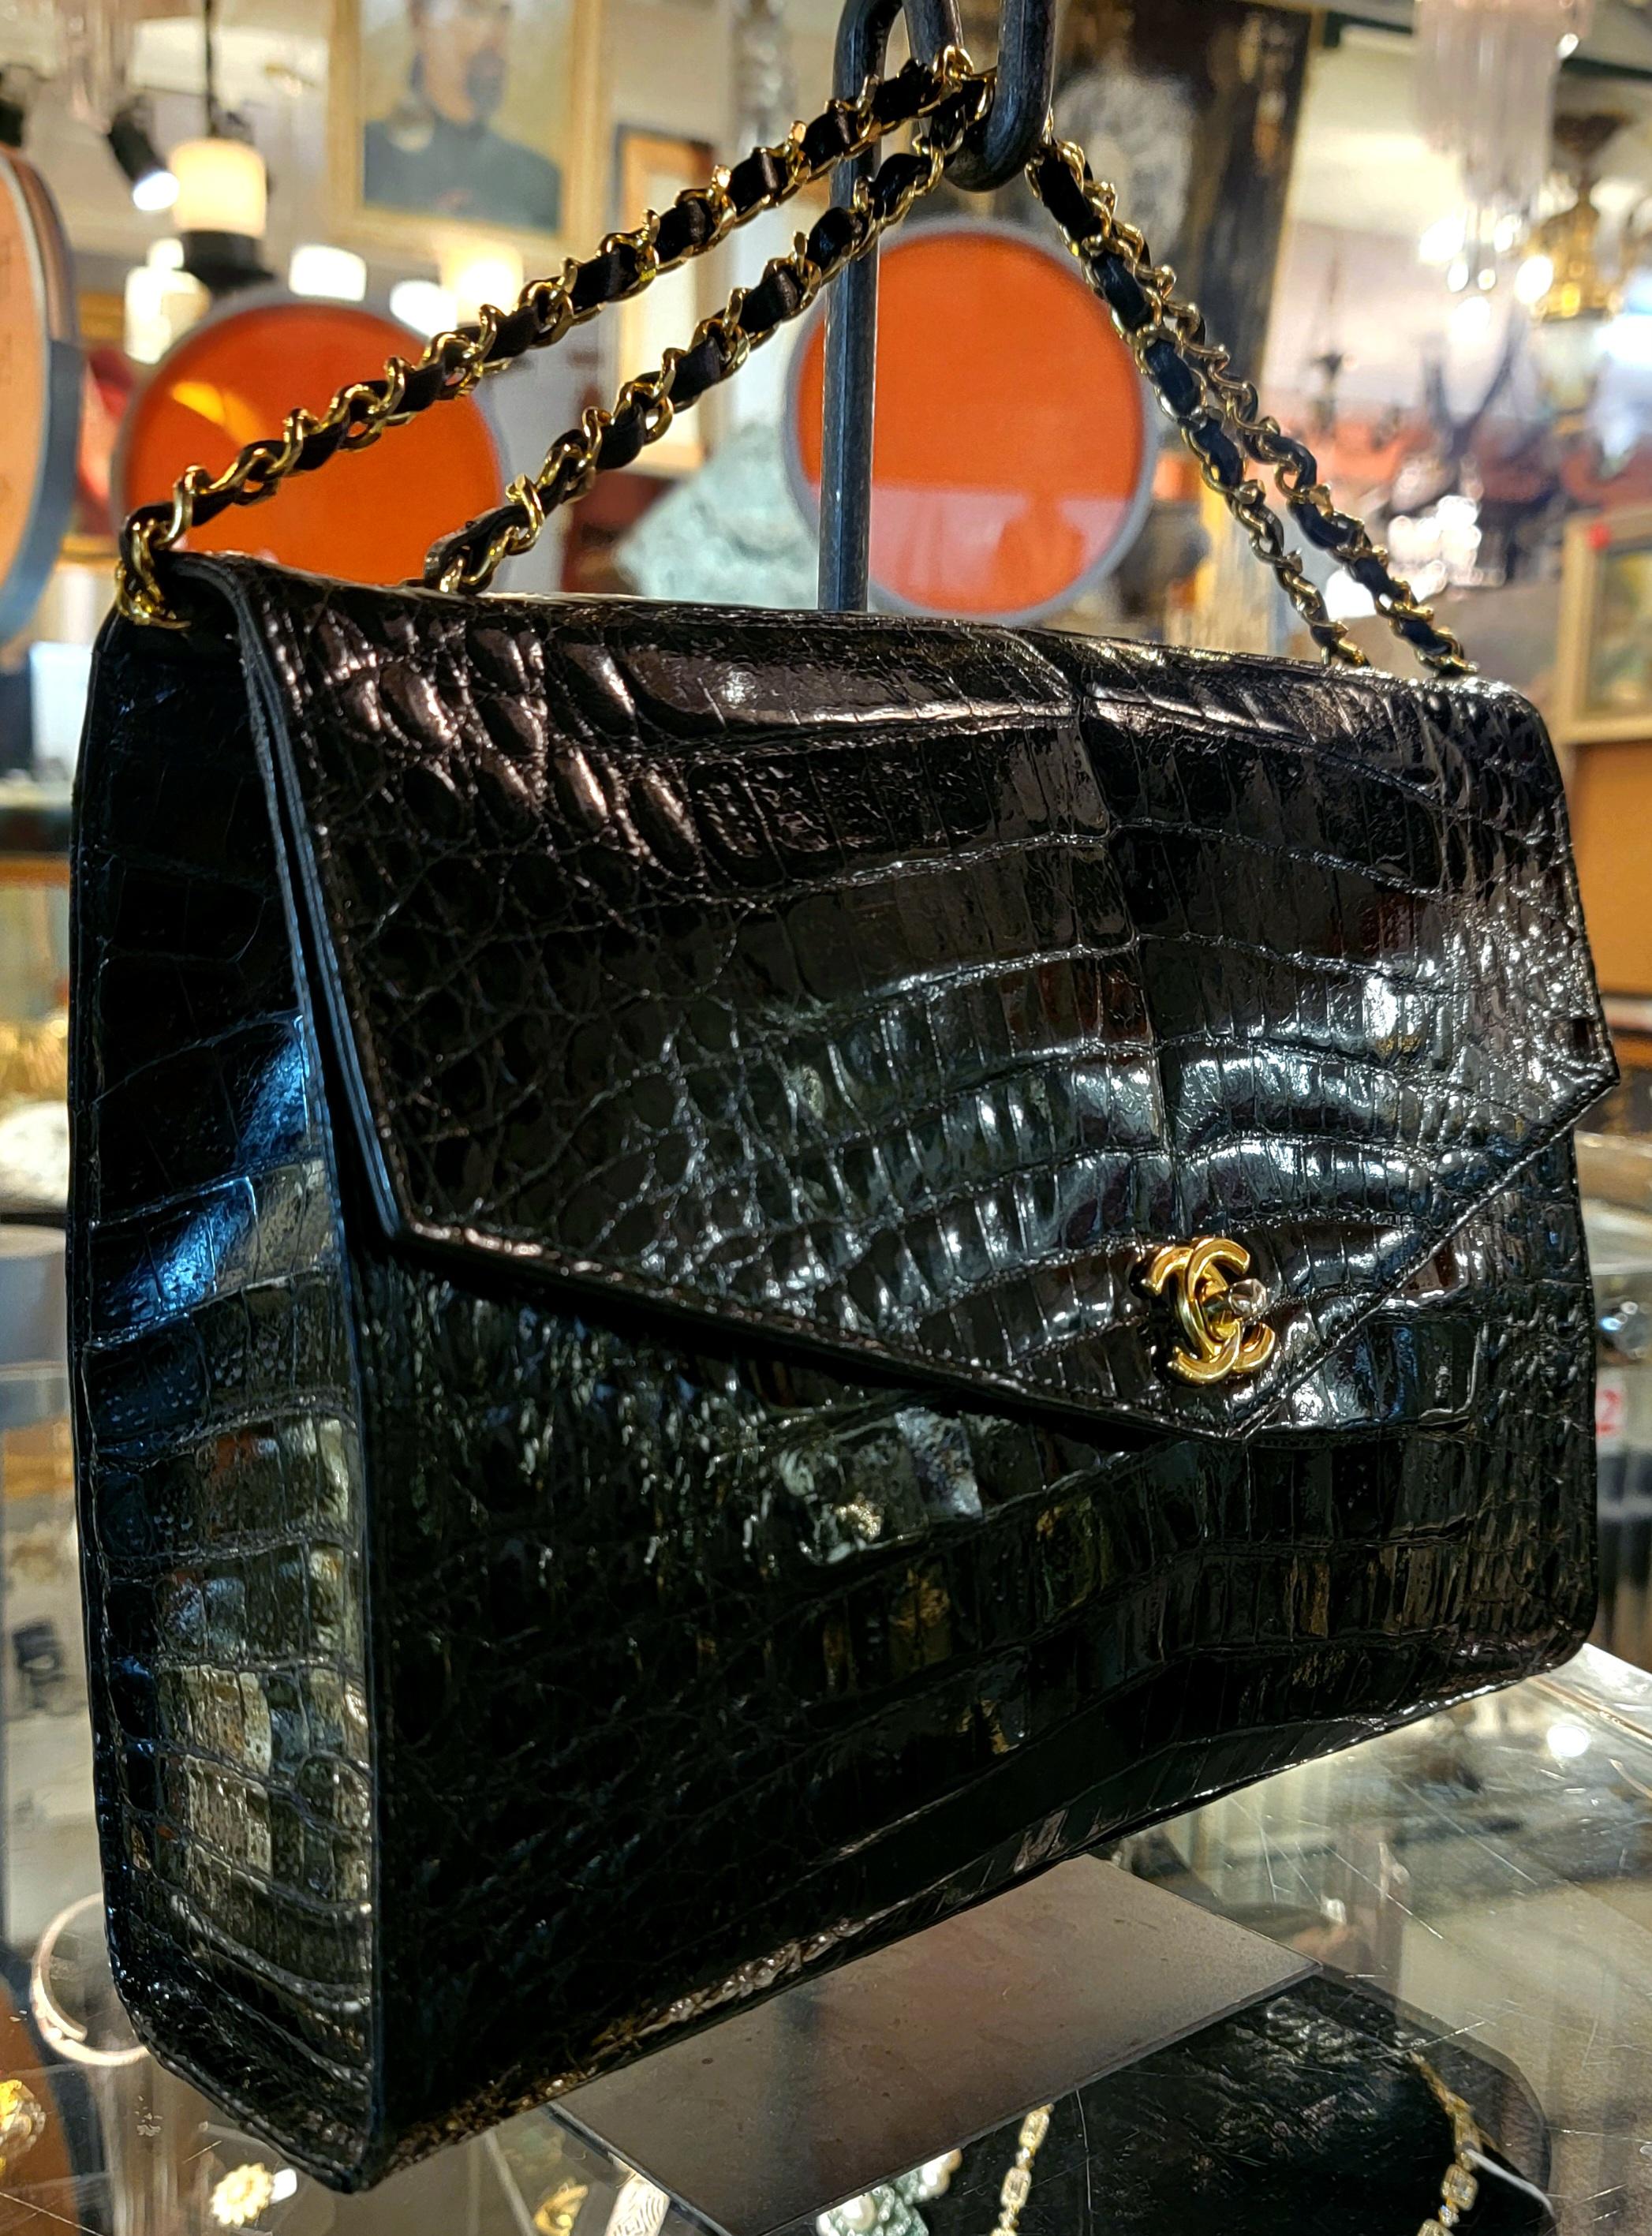 Chanel Crocodile Classic Jumbo Single Flap Handbag with Gold Hardware In Good Condition For Sale In Pasadena, CA